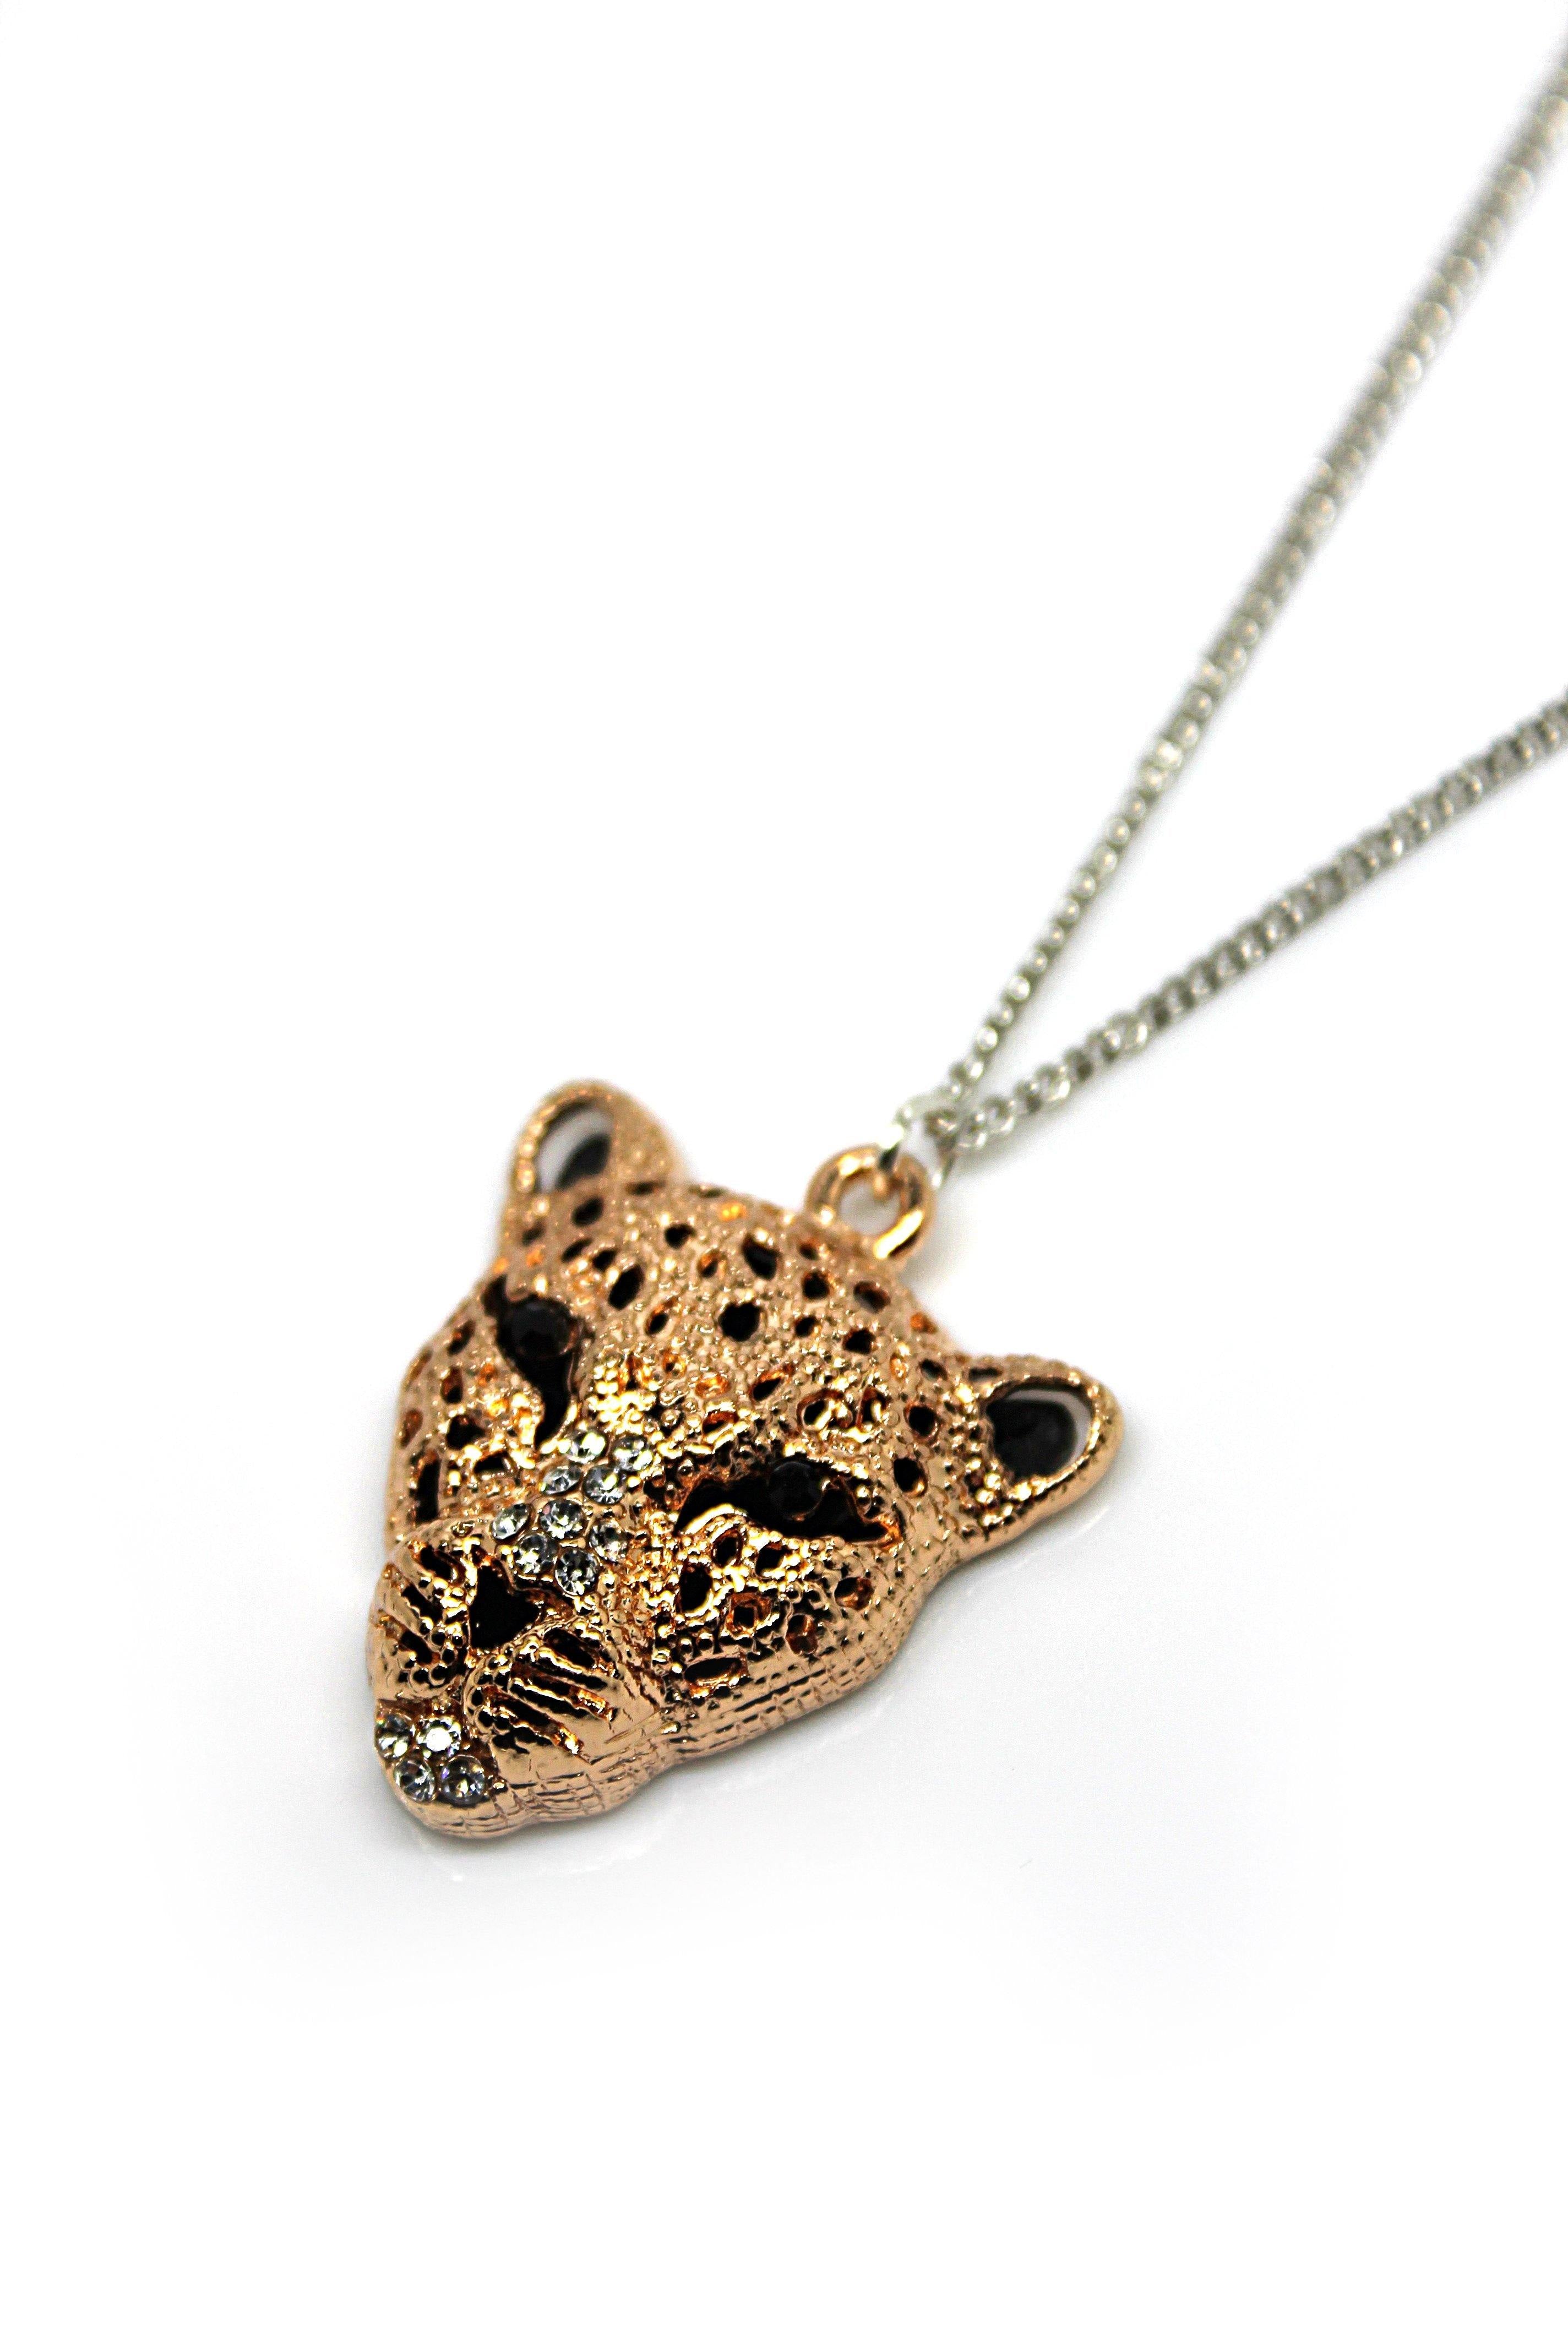 Leopard Necklace - Wildtouch - Wildtouch